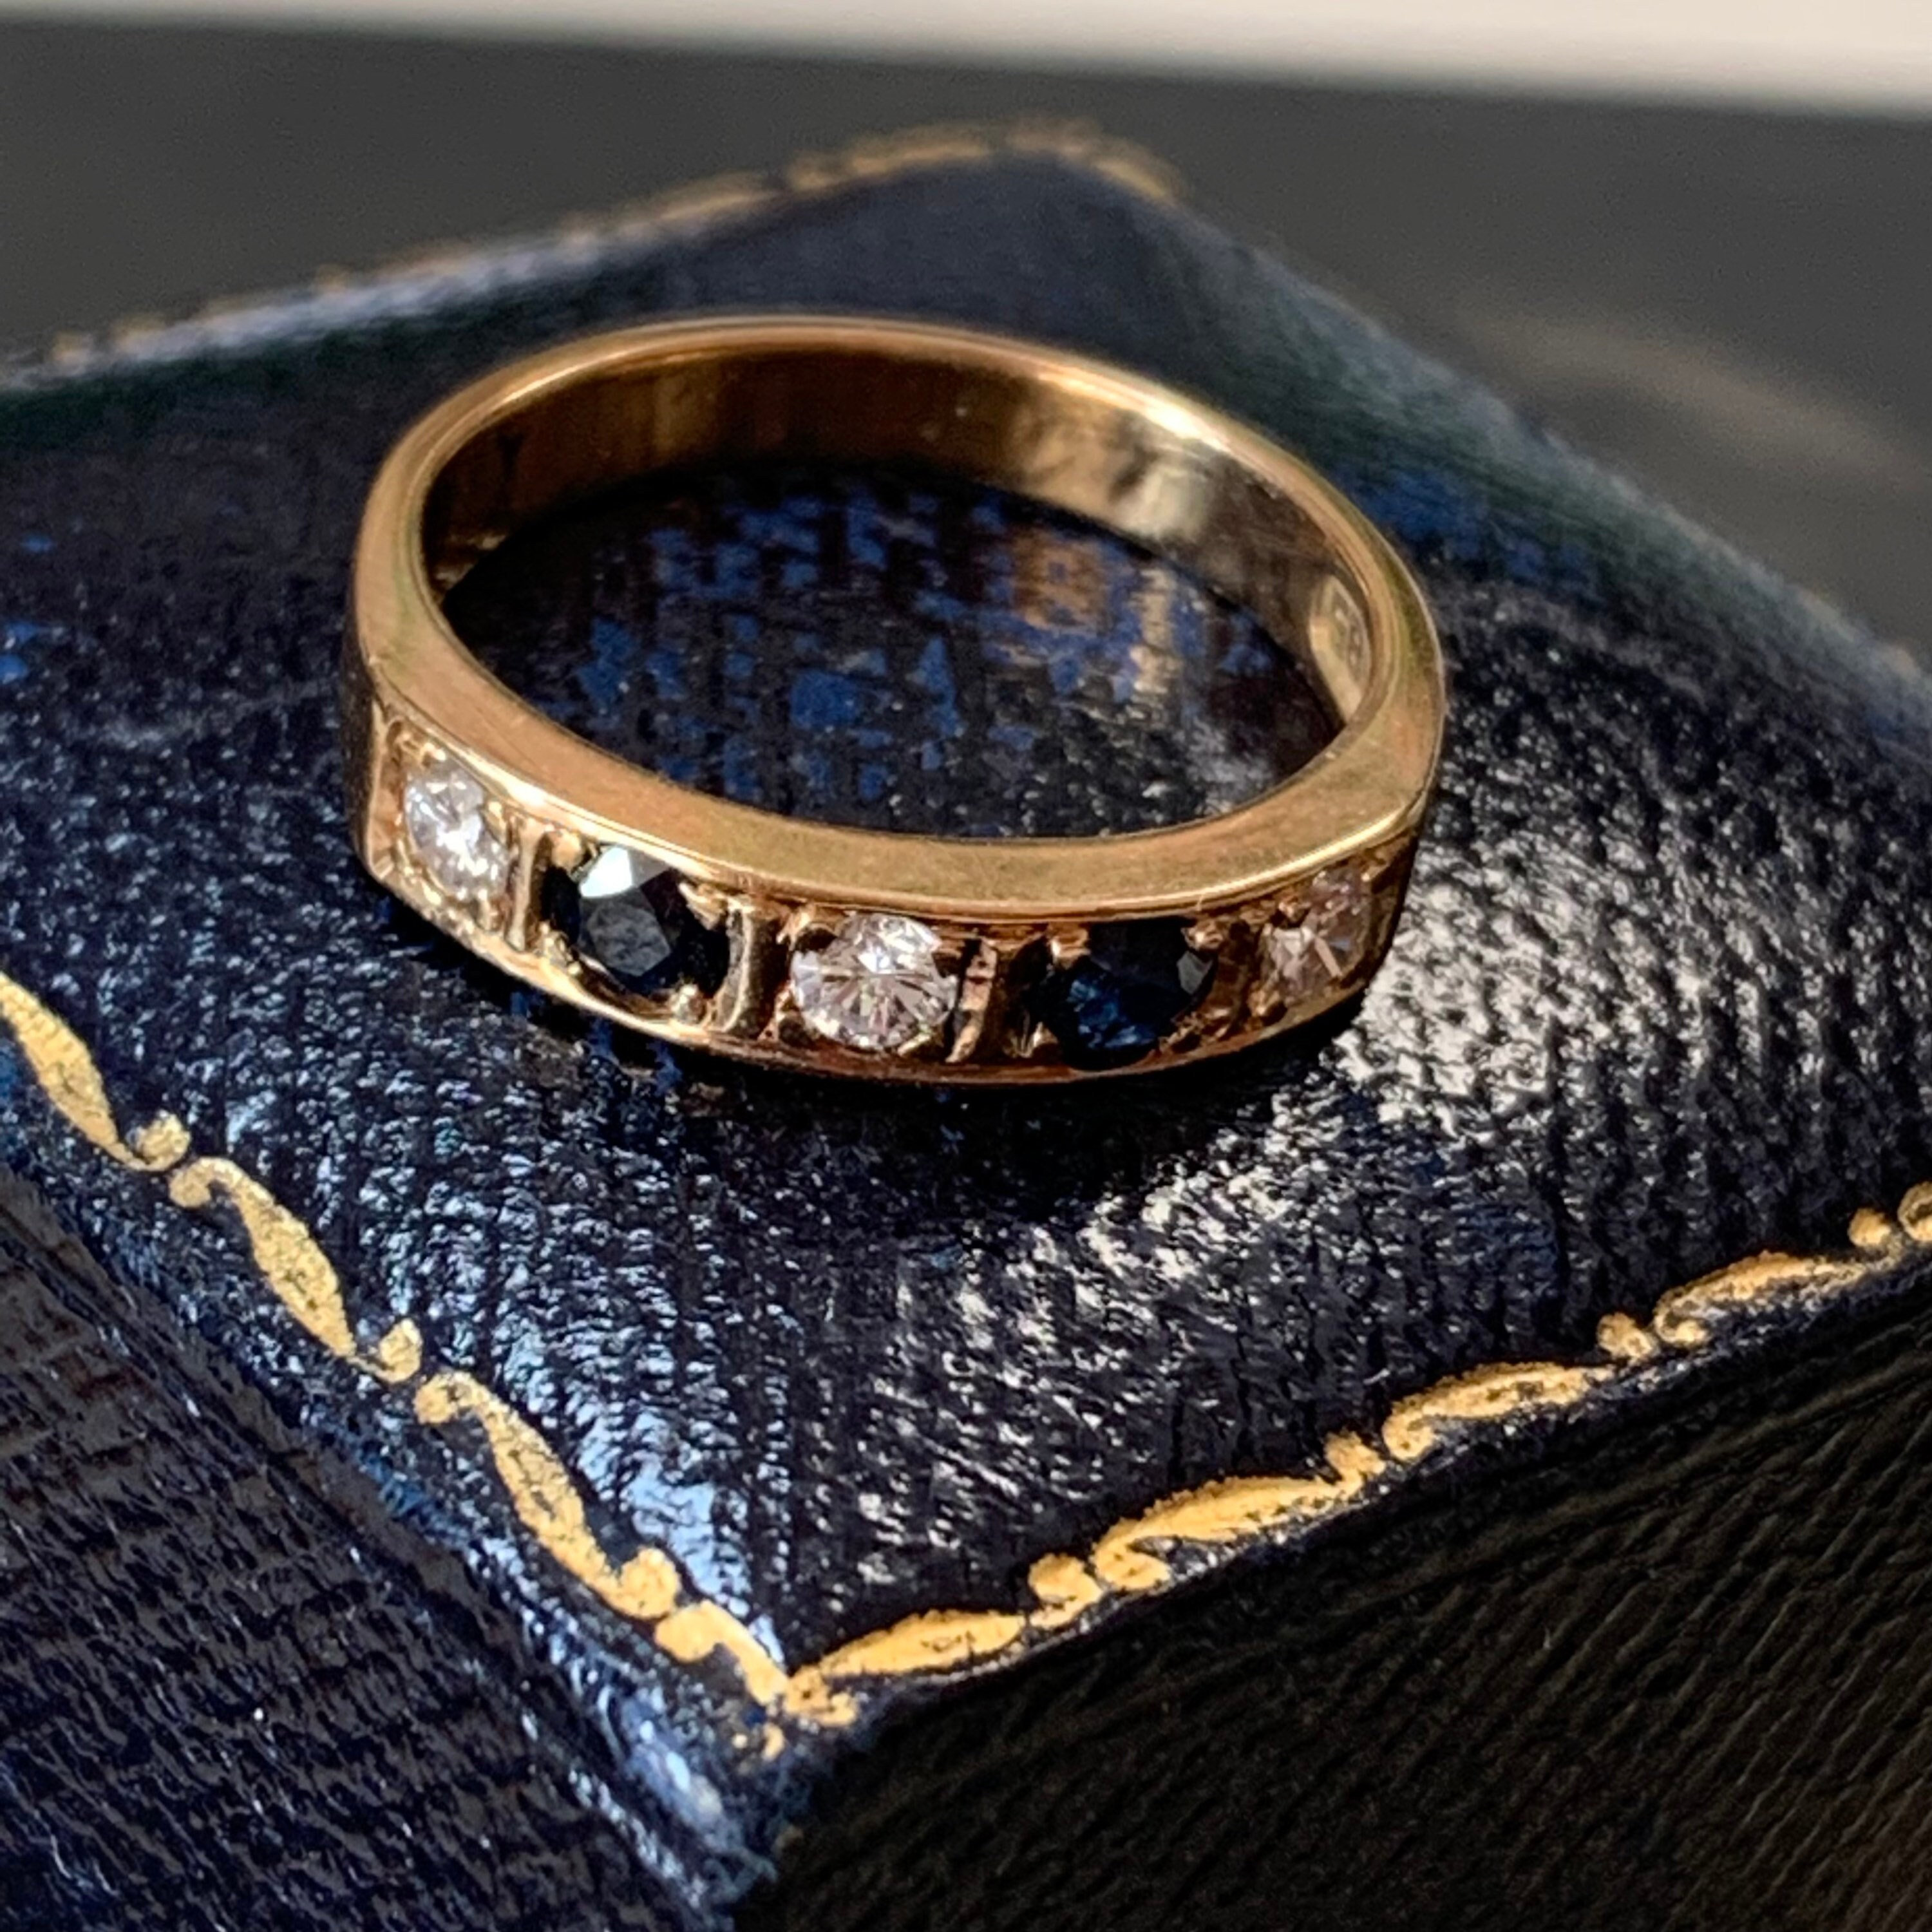 Wedding Ring With Beautiful Diamonds & Sapphires Set in 14 Carat Gold A Half Eternity Design. A Very Special Piece